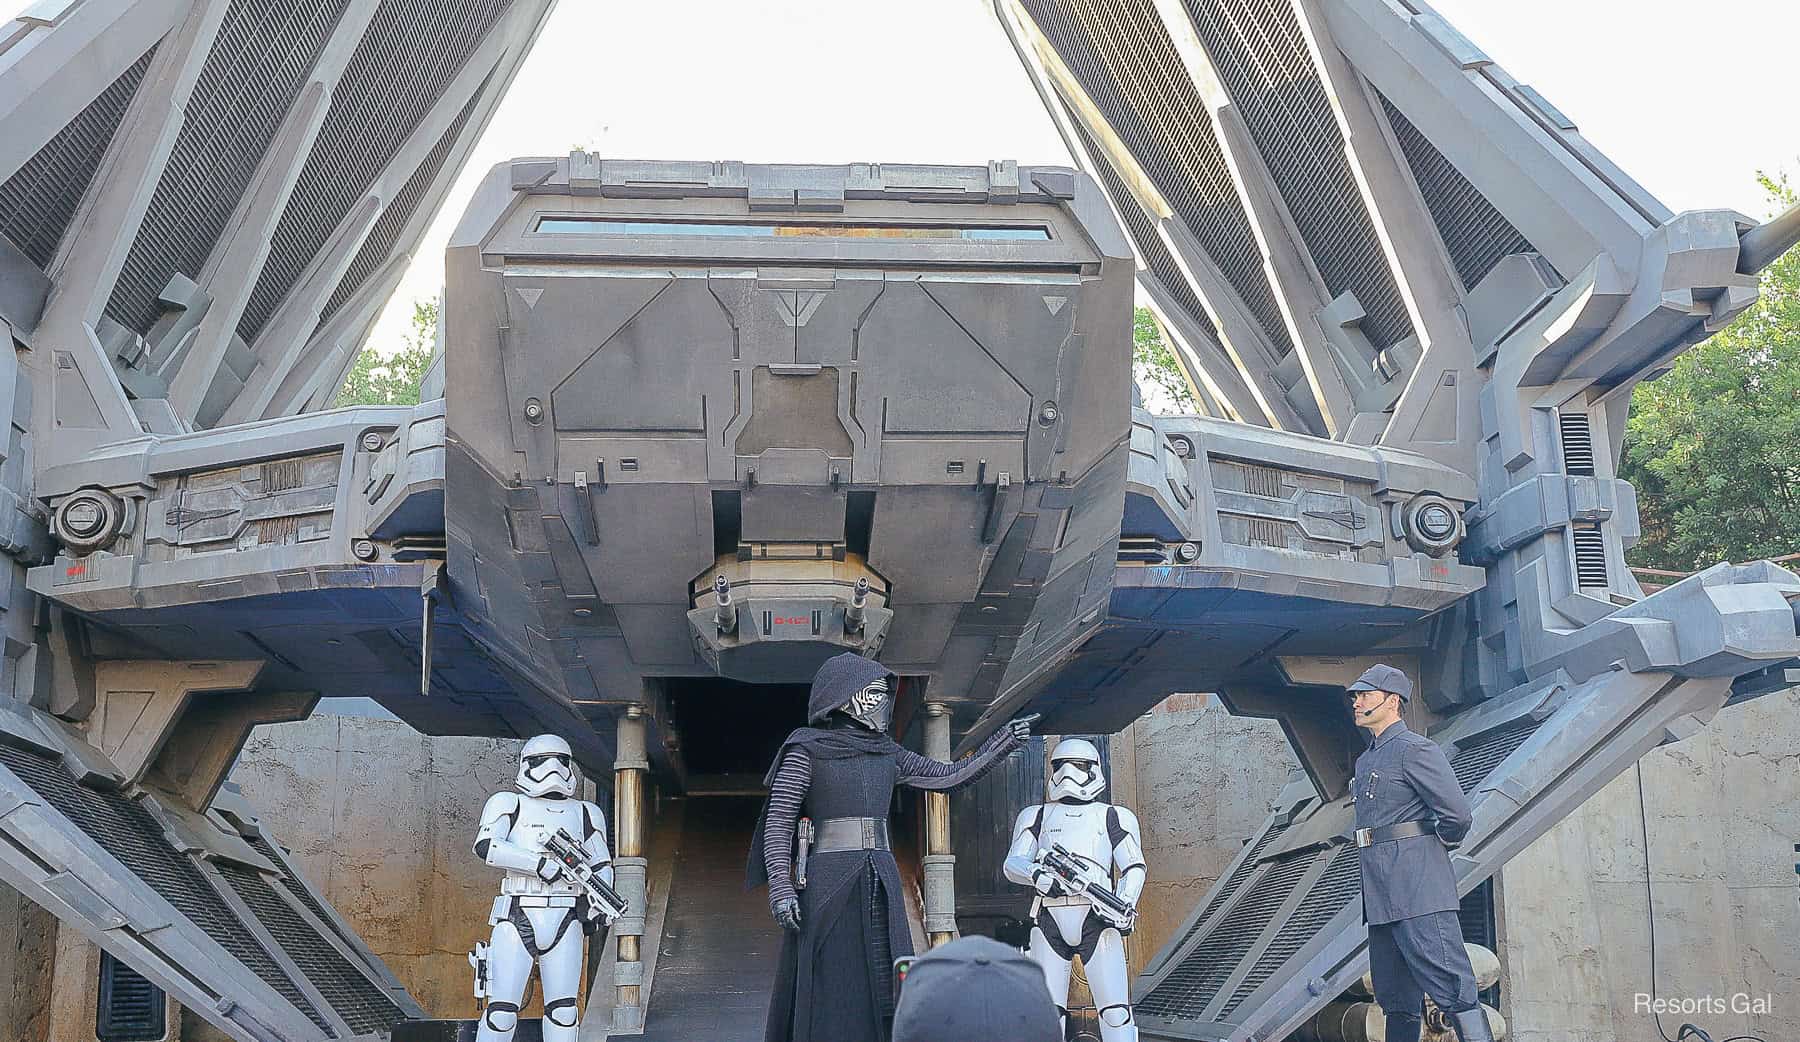 The First Order Searches for the Resistance at Disney's Hollywood Studios